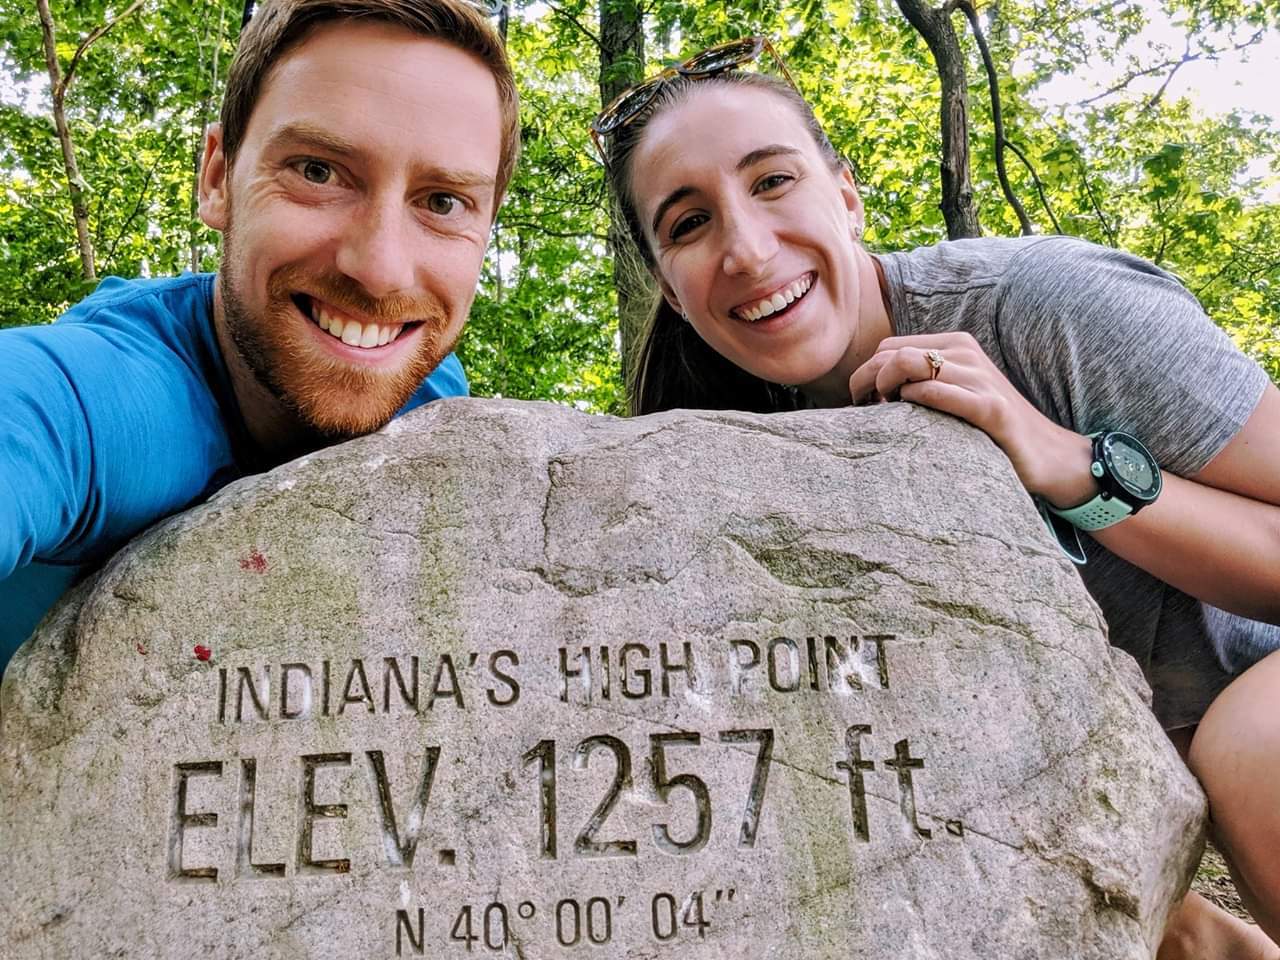 A man and woman pose for a picture with a rock that says Indiana's High Point Elev. 1257 ft.
